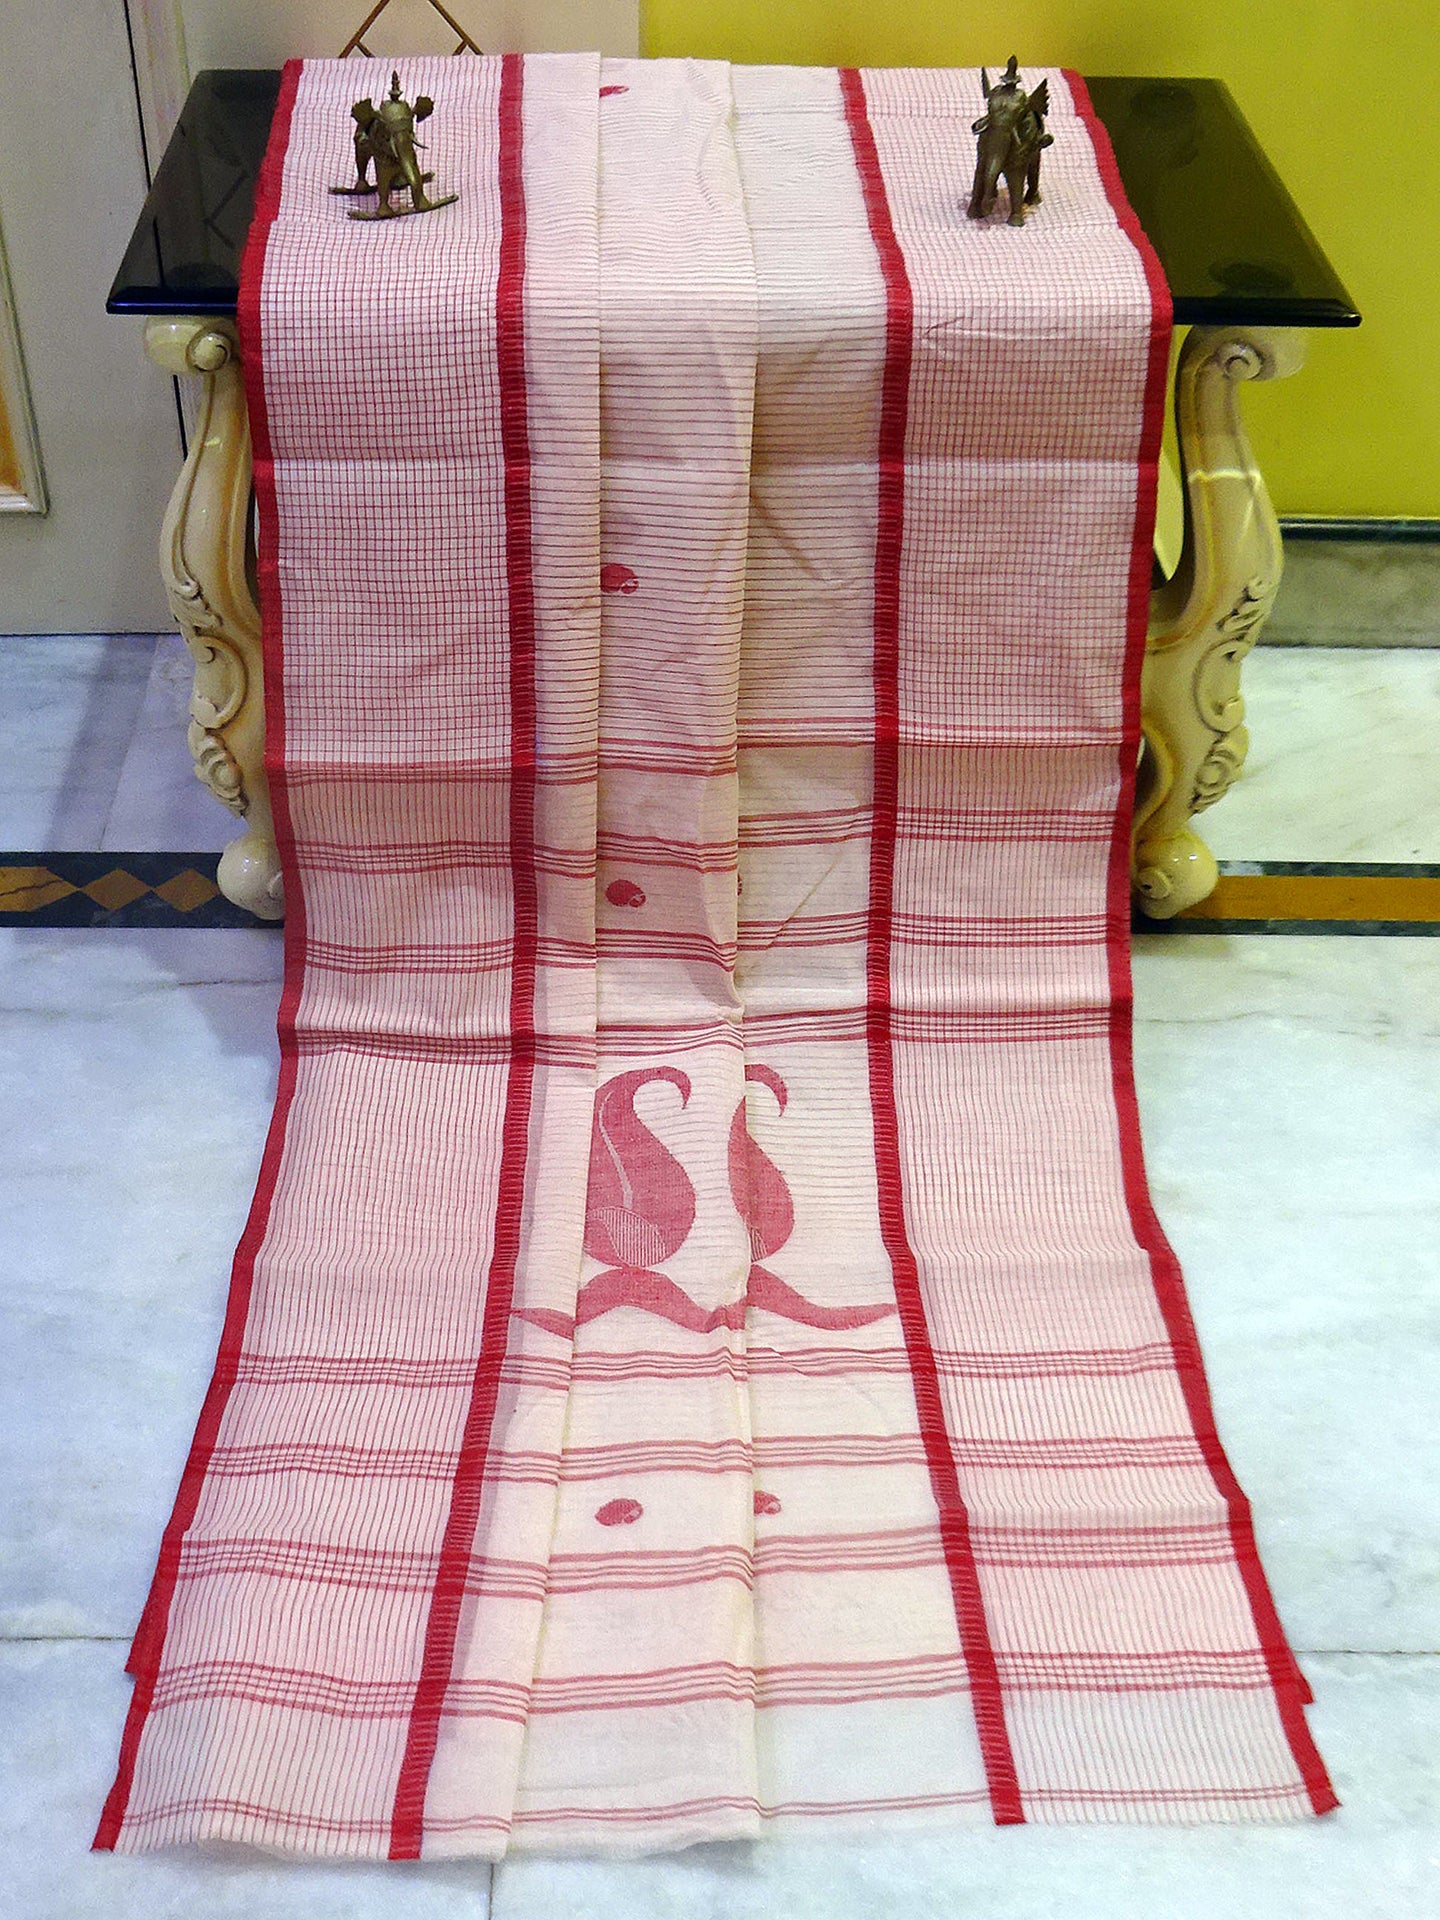 Premium Quality Bengal Handloom Cotton Saree in White and Red